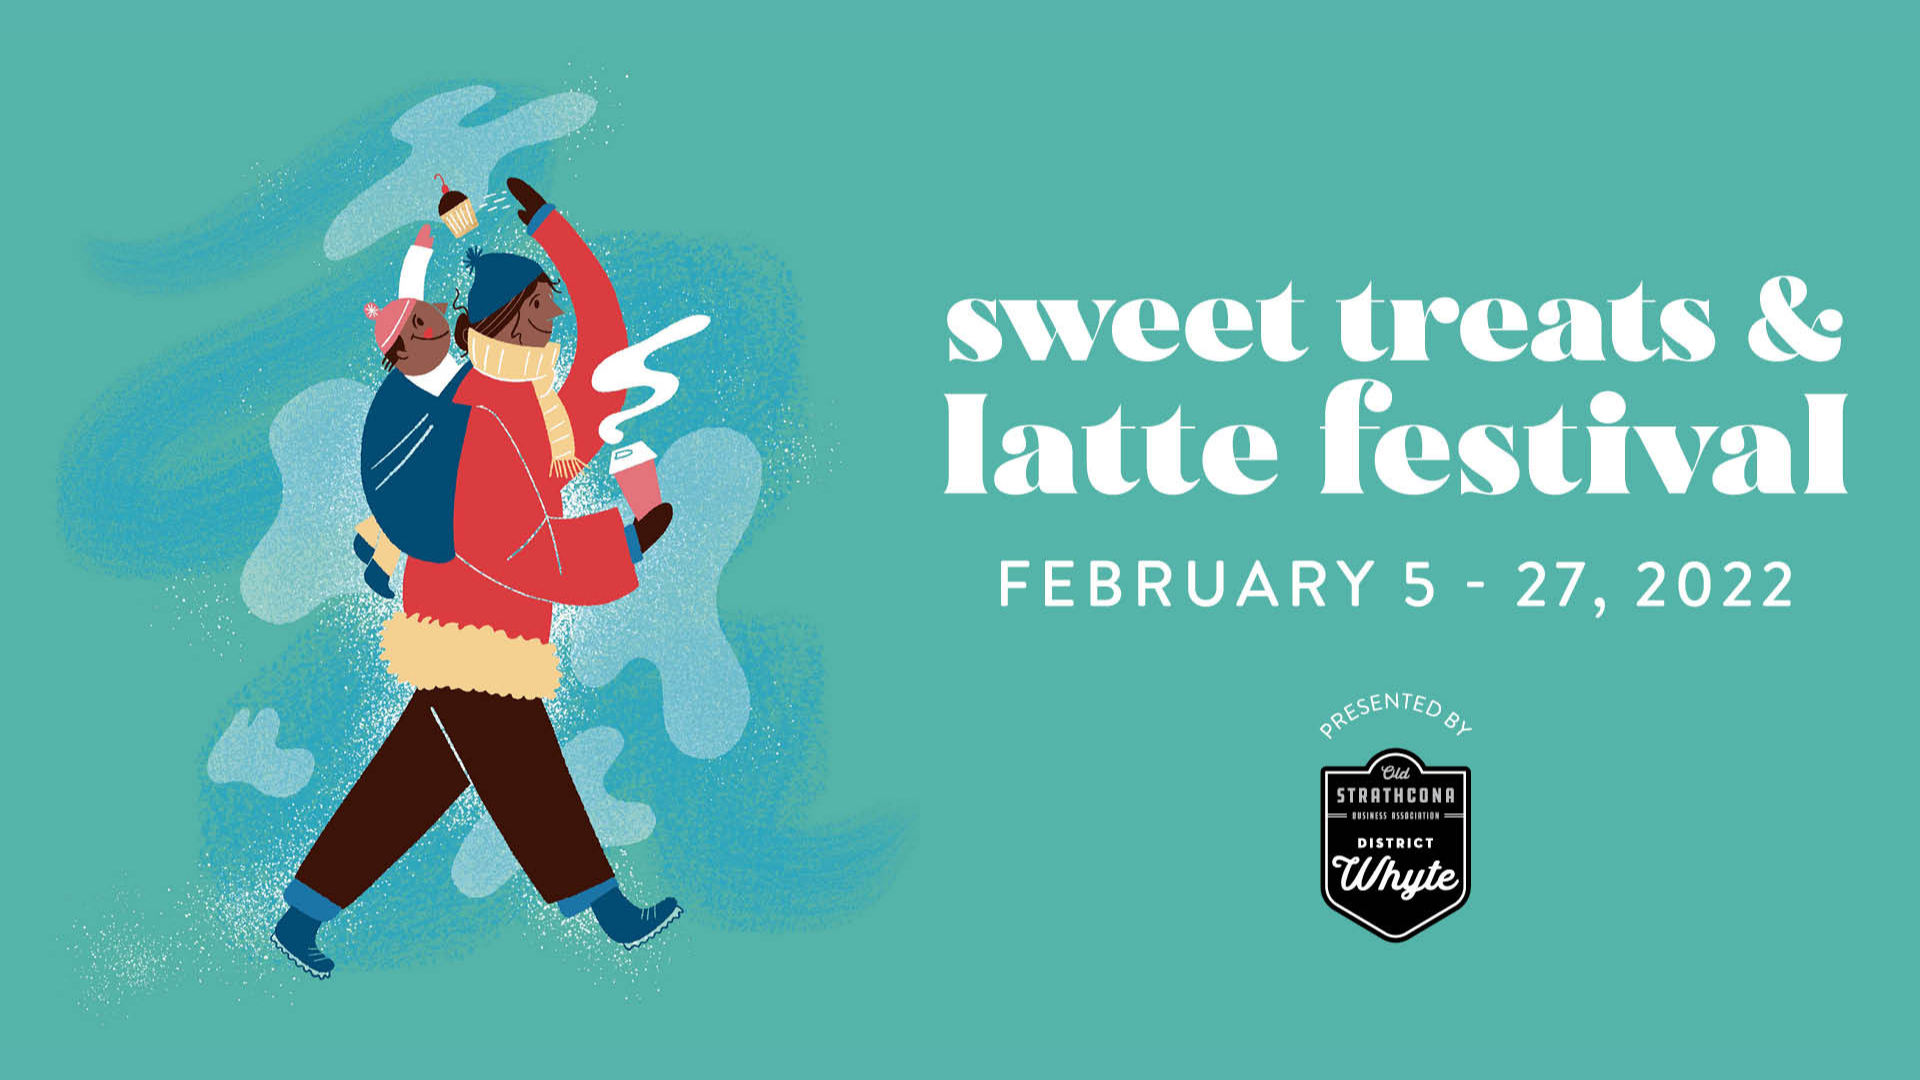 Sweet Treats and Latte Festival image, with an illustrated woman carrying a coffee tossing a cupcake up to a small child riding on her shoulders